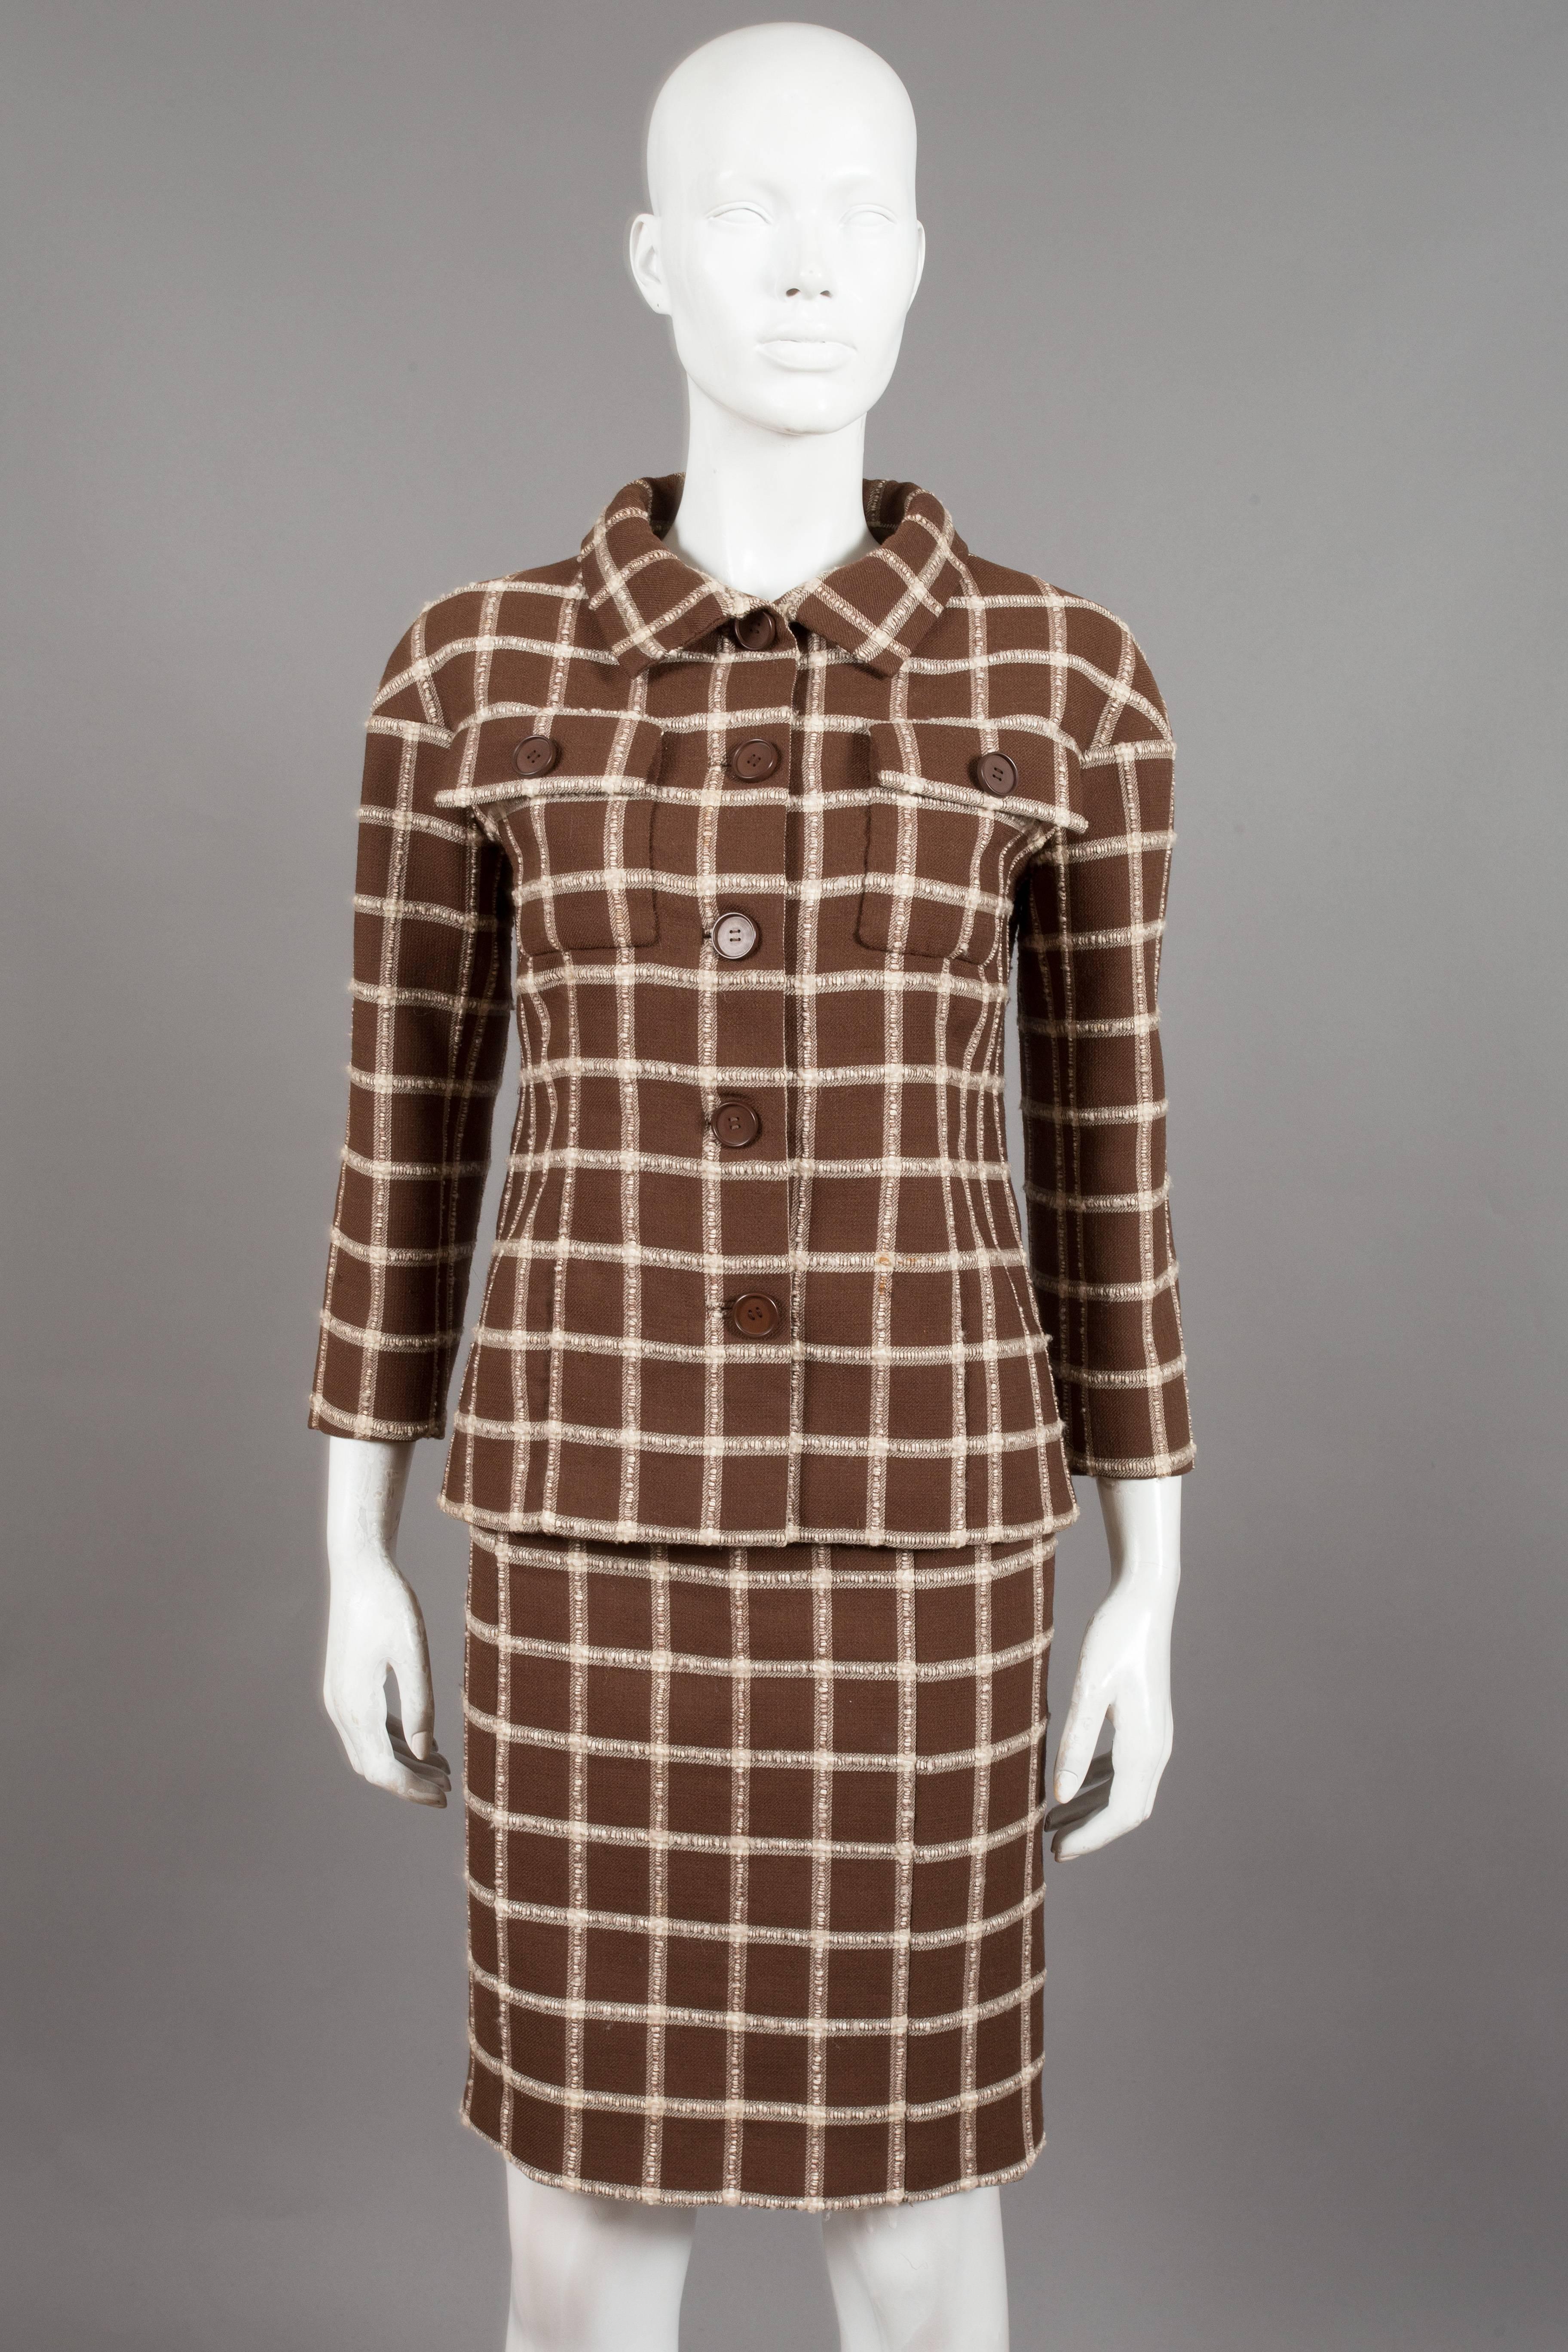 Balenciaga Eisa couture flecked brown and cream checked tweed suit, C. 1965 2